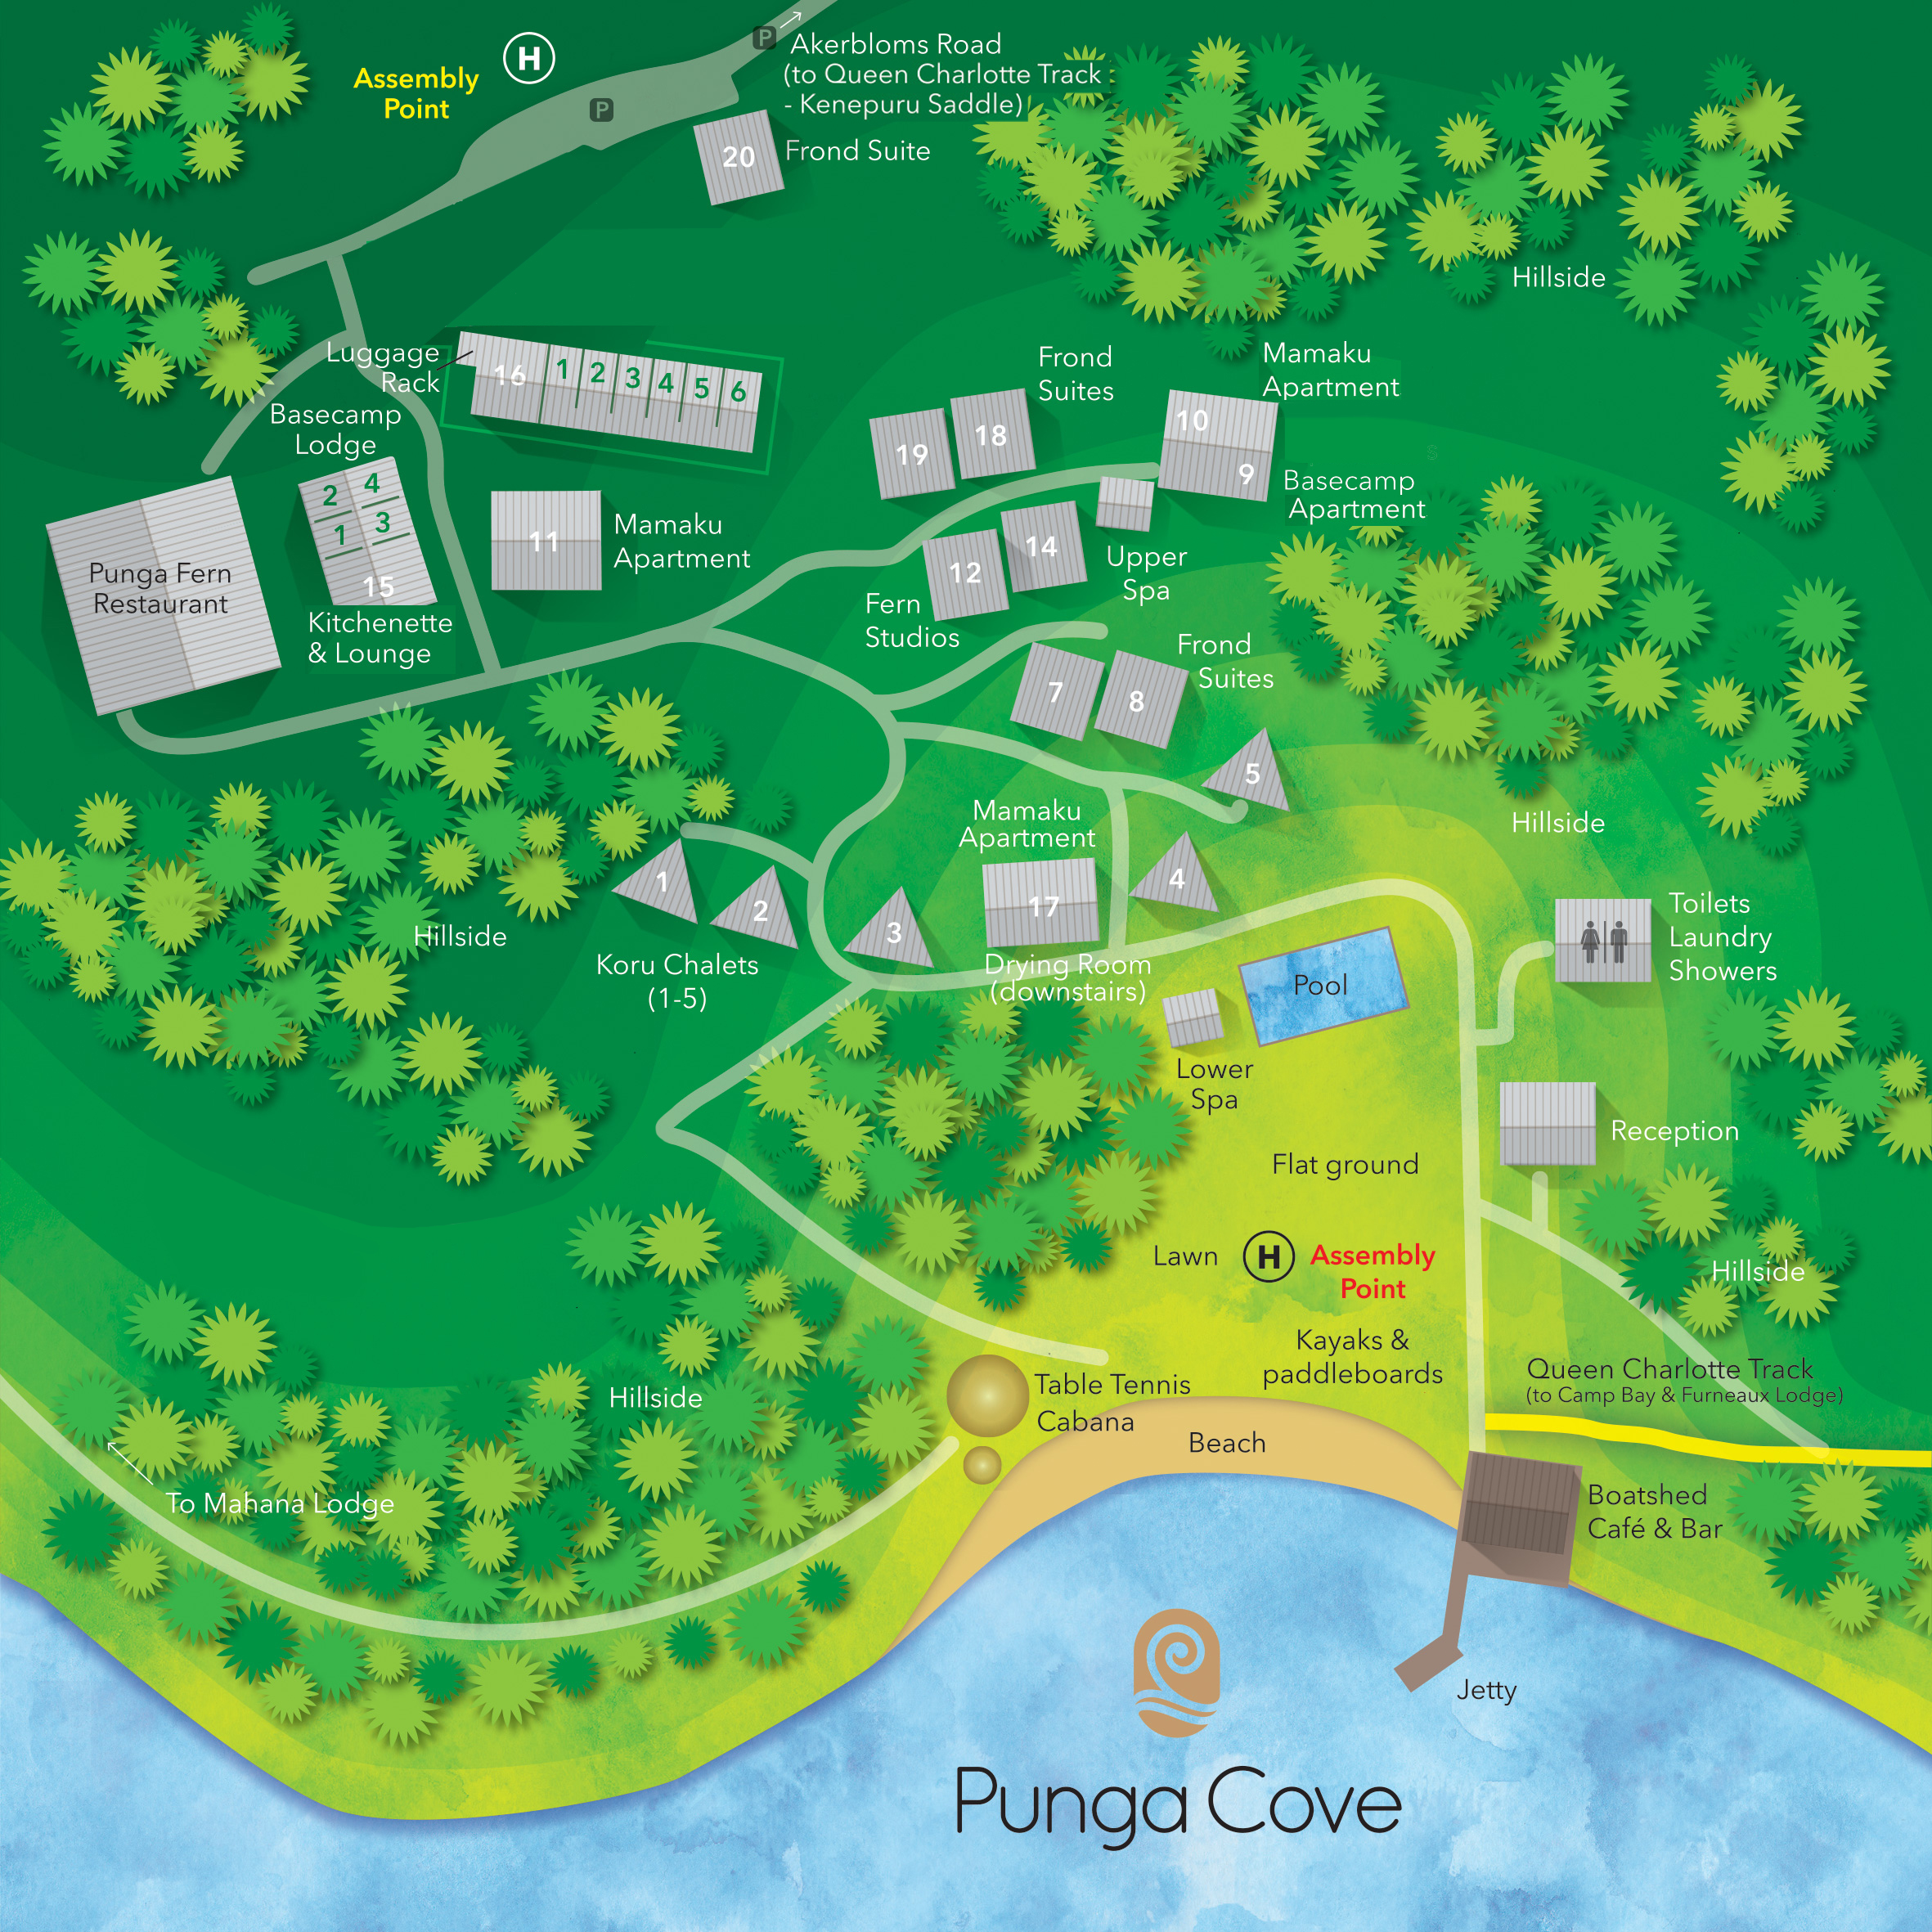 The Punga Cove propety map is a layout of the accommodation rooms and buildings in the Marlborough Sounds in New Zealand's top of the South Island